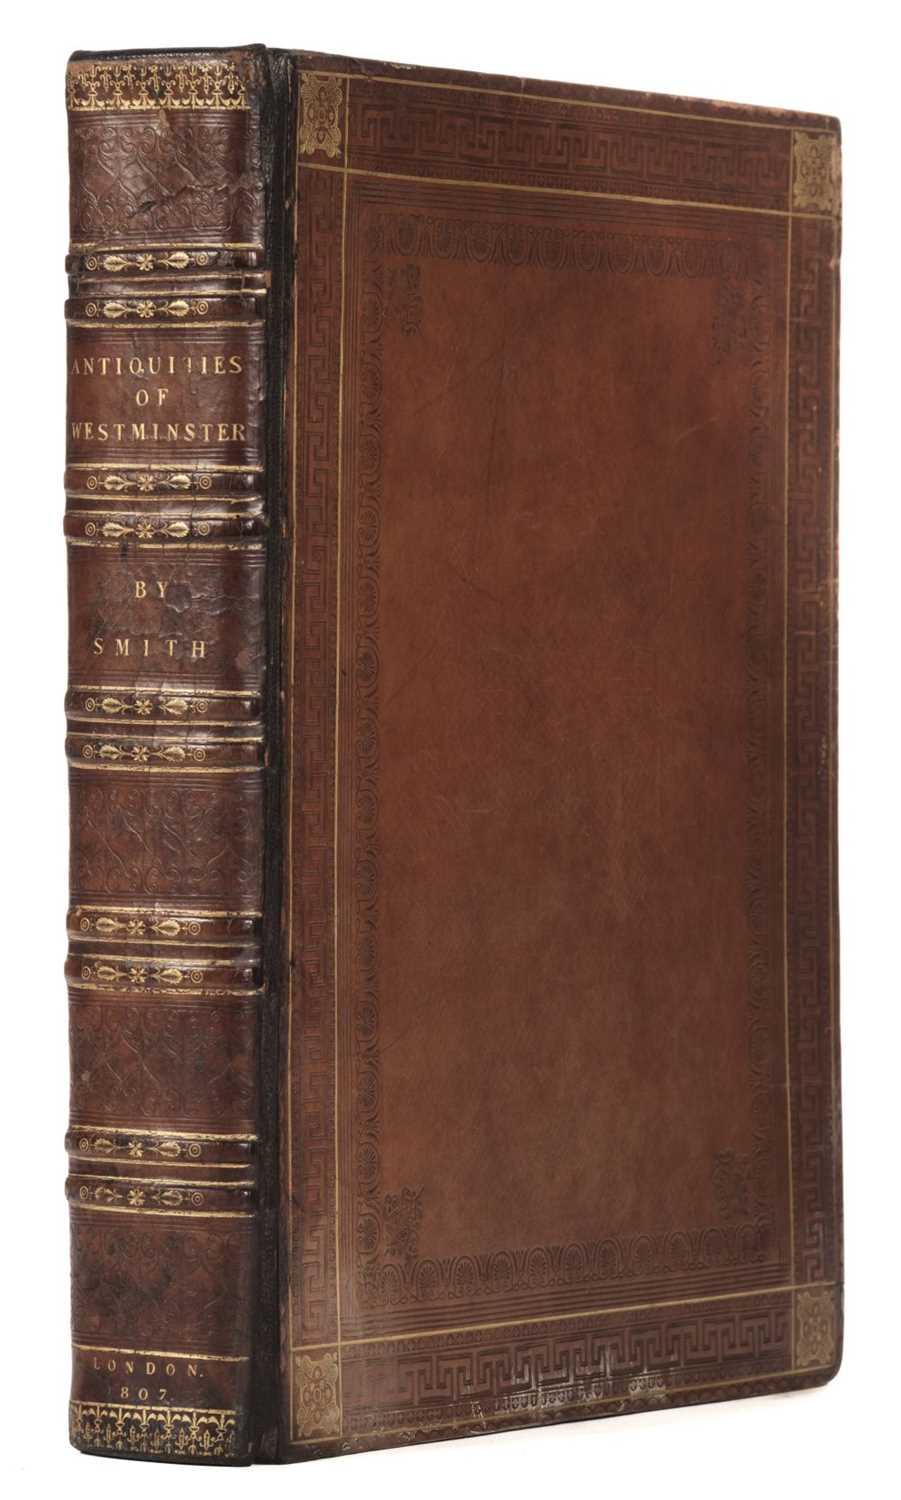 Lot 74 - Smith (John Thomas). Antiquities of Westminster, 1st edition, 1807 with another